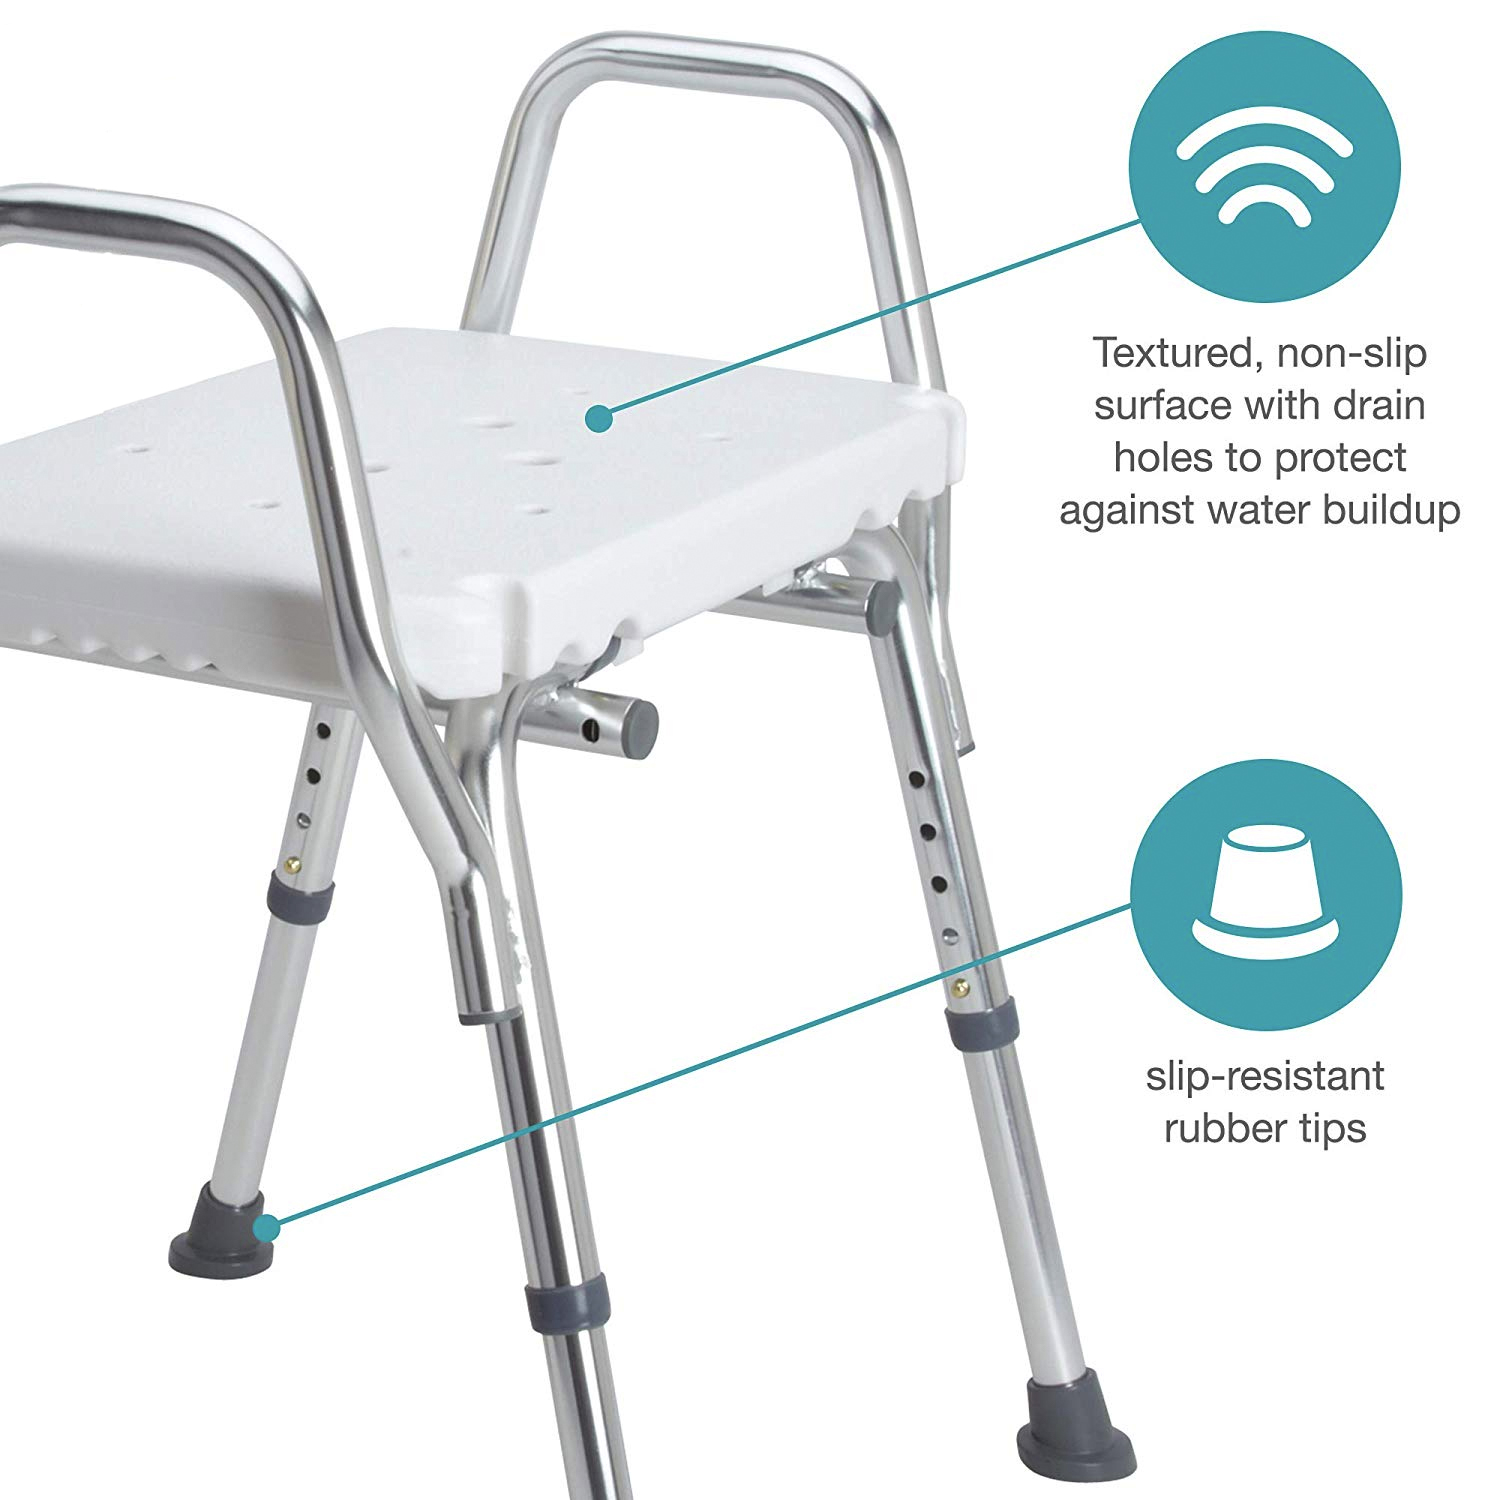 DMI Shower Chair, 16-20"H, 19 x 13 Seat, 350 lb Capacity - image 3 of 7